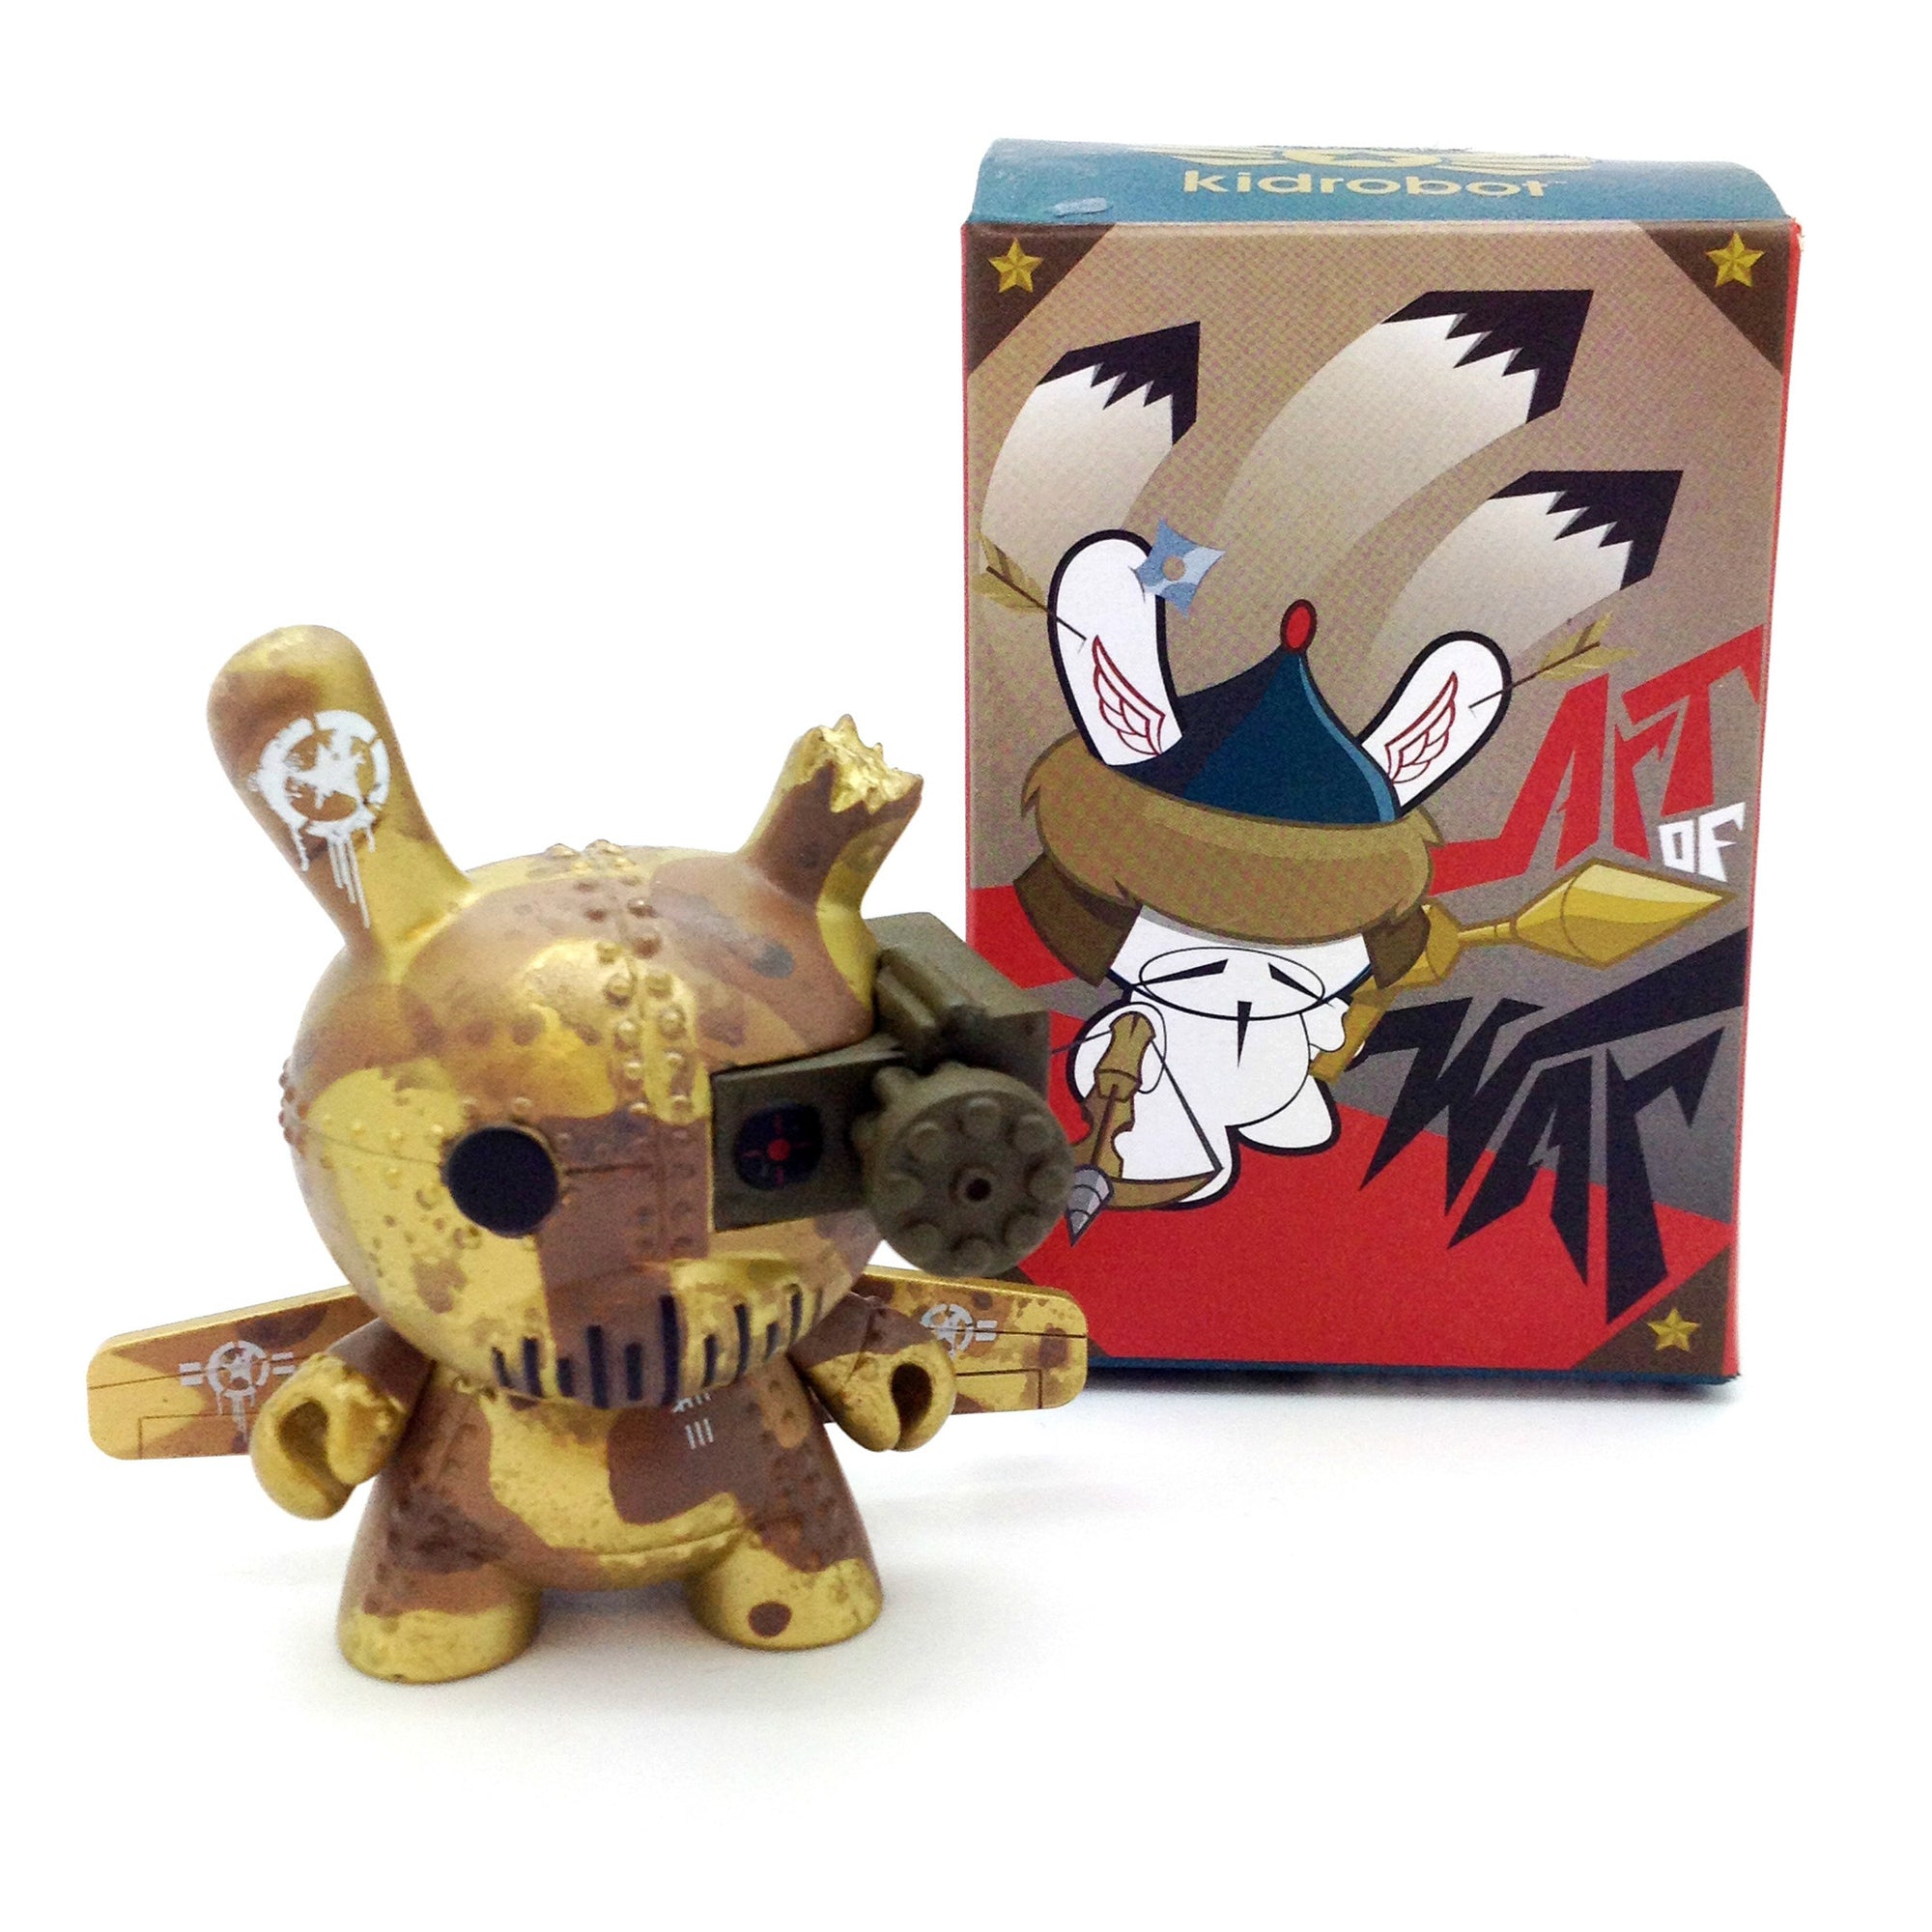 Art of War Dunny Series - Tank Destroyer by DrilOne (Case Exclusive) - Mindzai  - 2